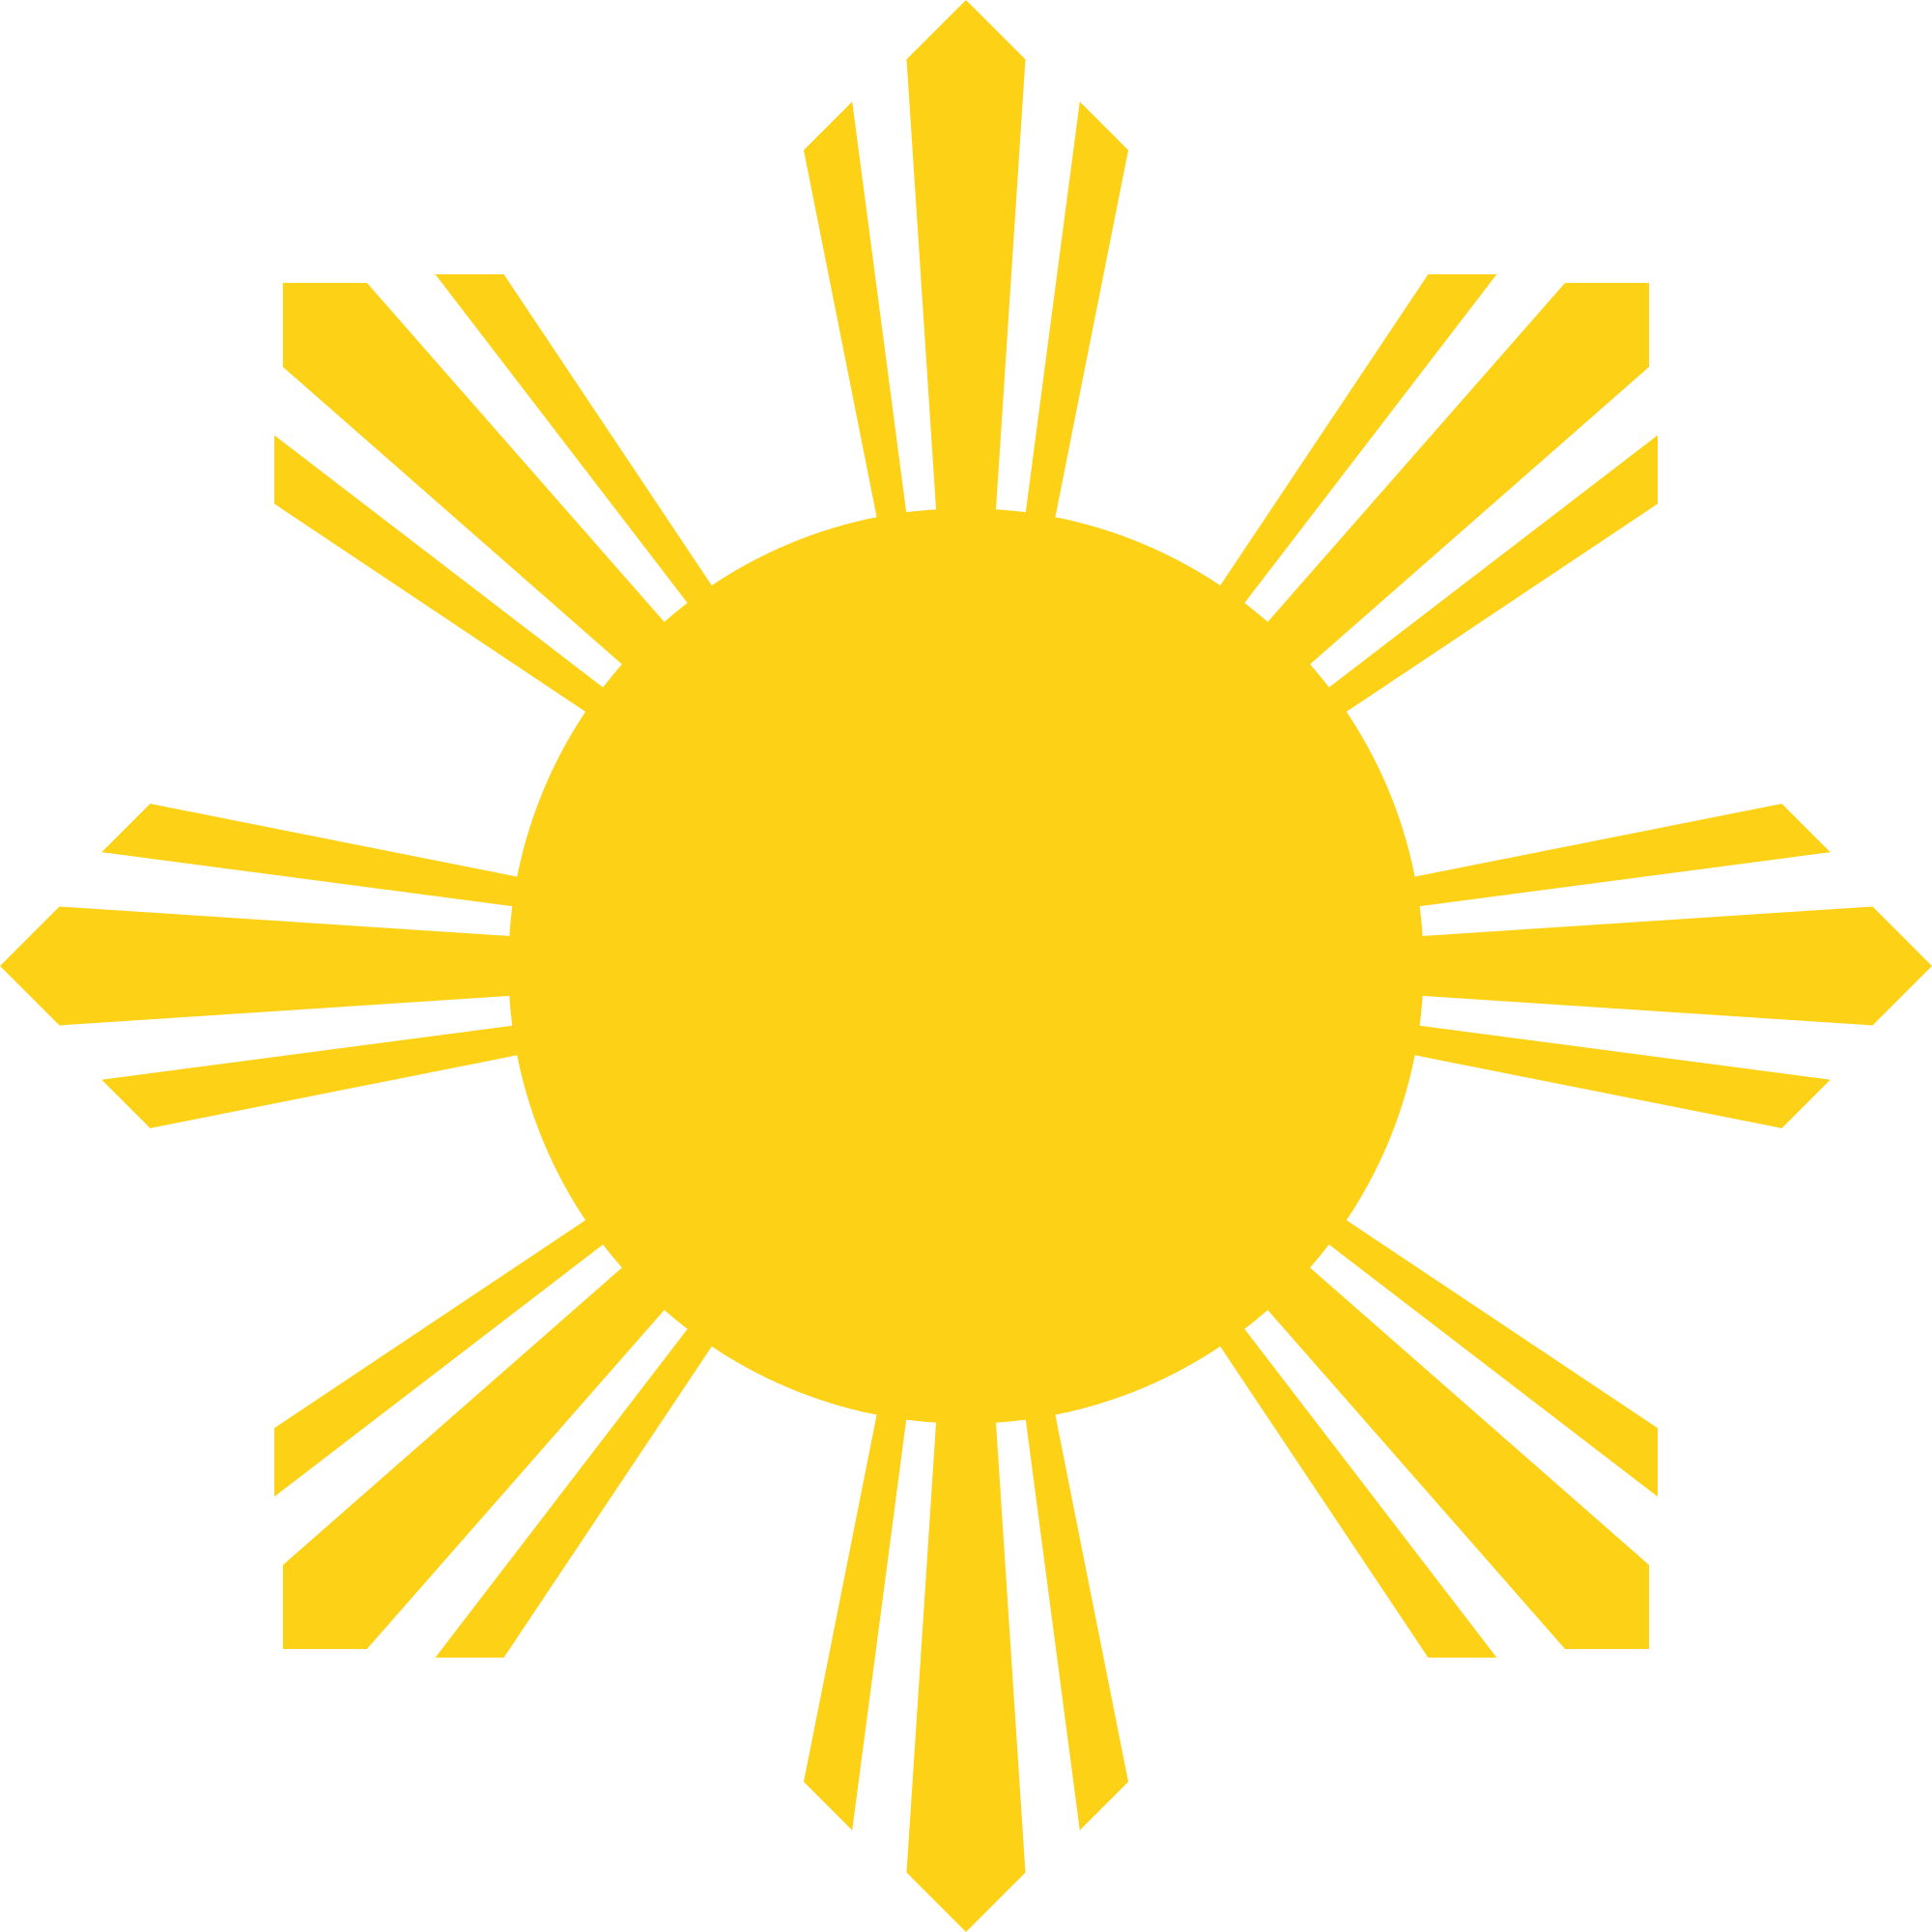 Flag of the Philippines - Wikipedia, the free encyclopedia